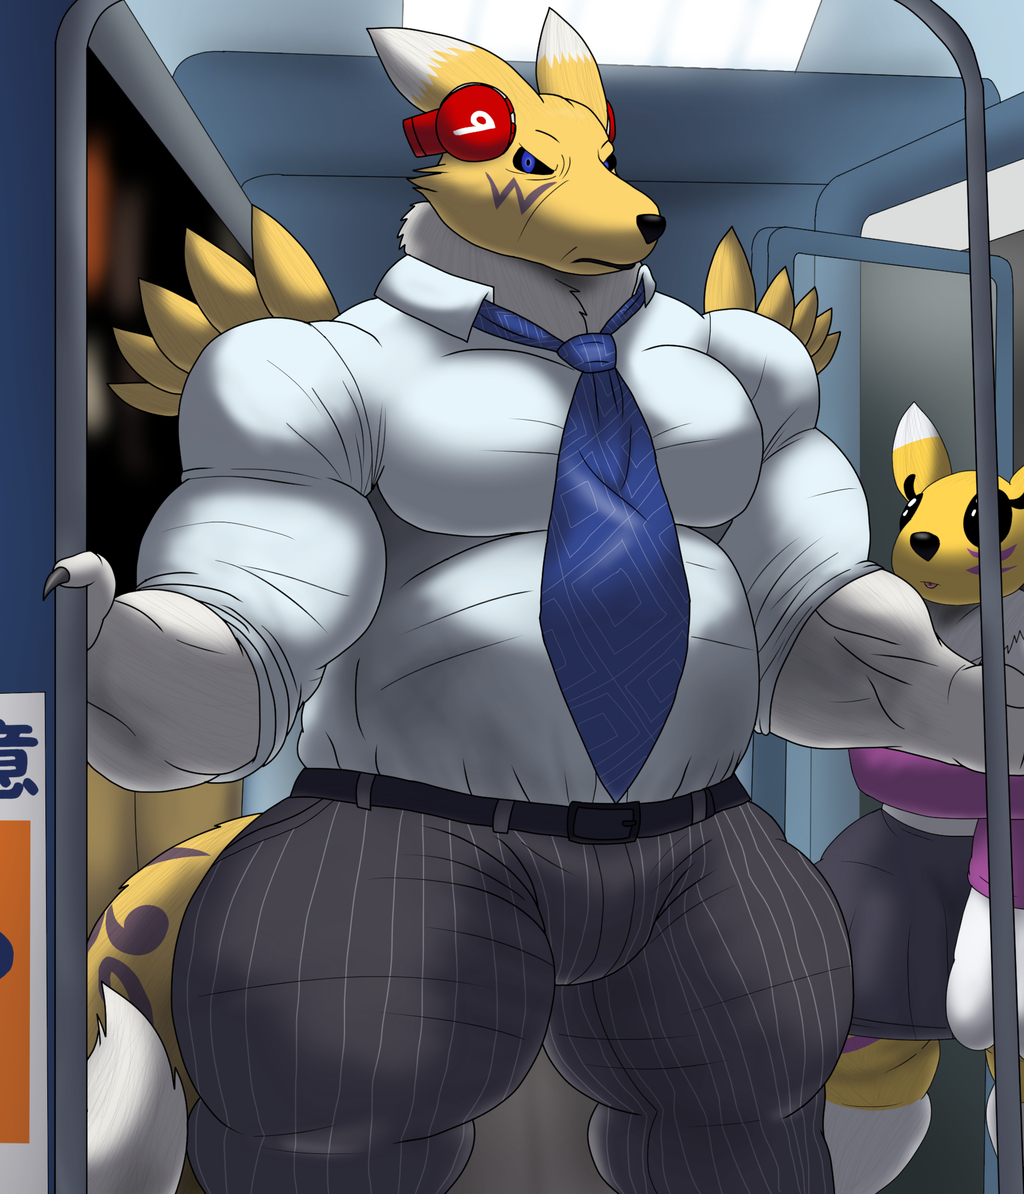 Most recent image: OfficeRenamon